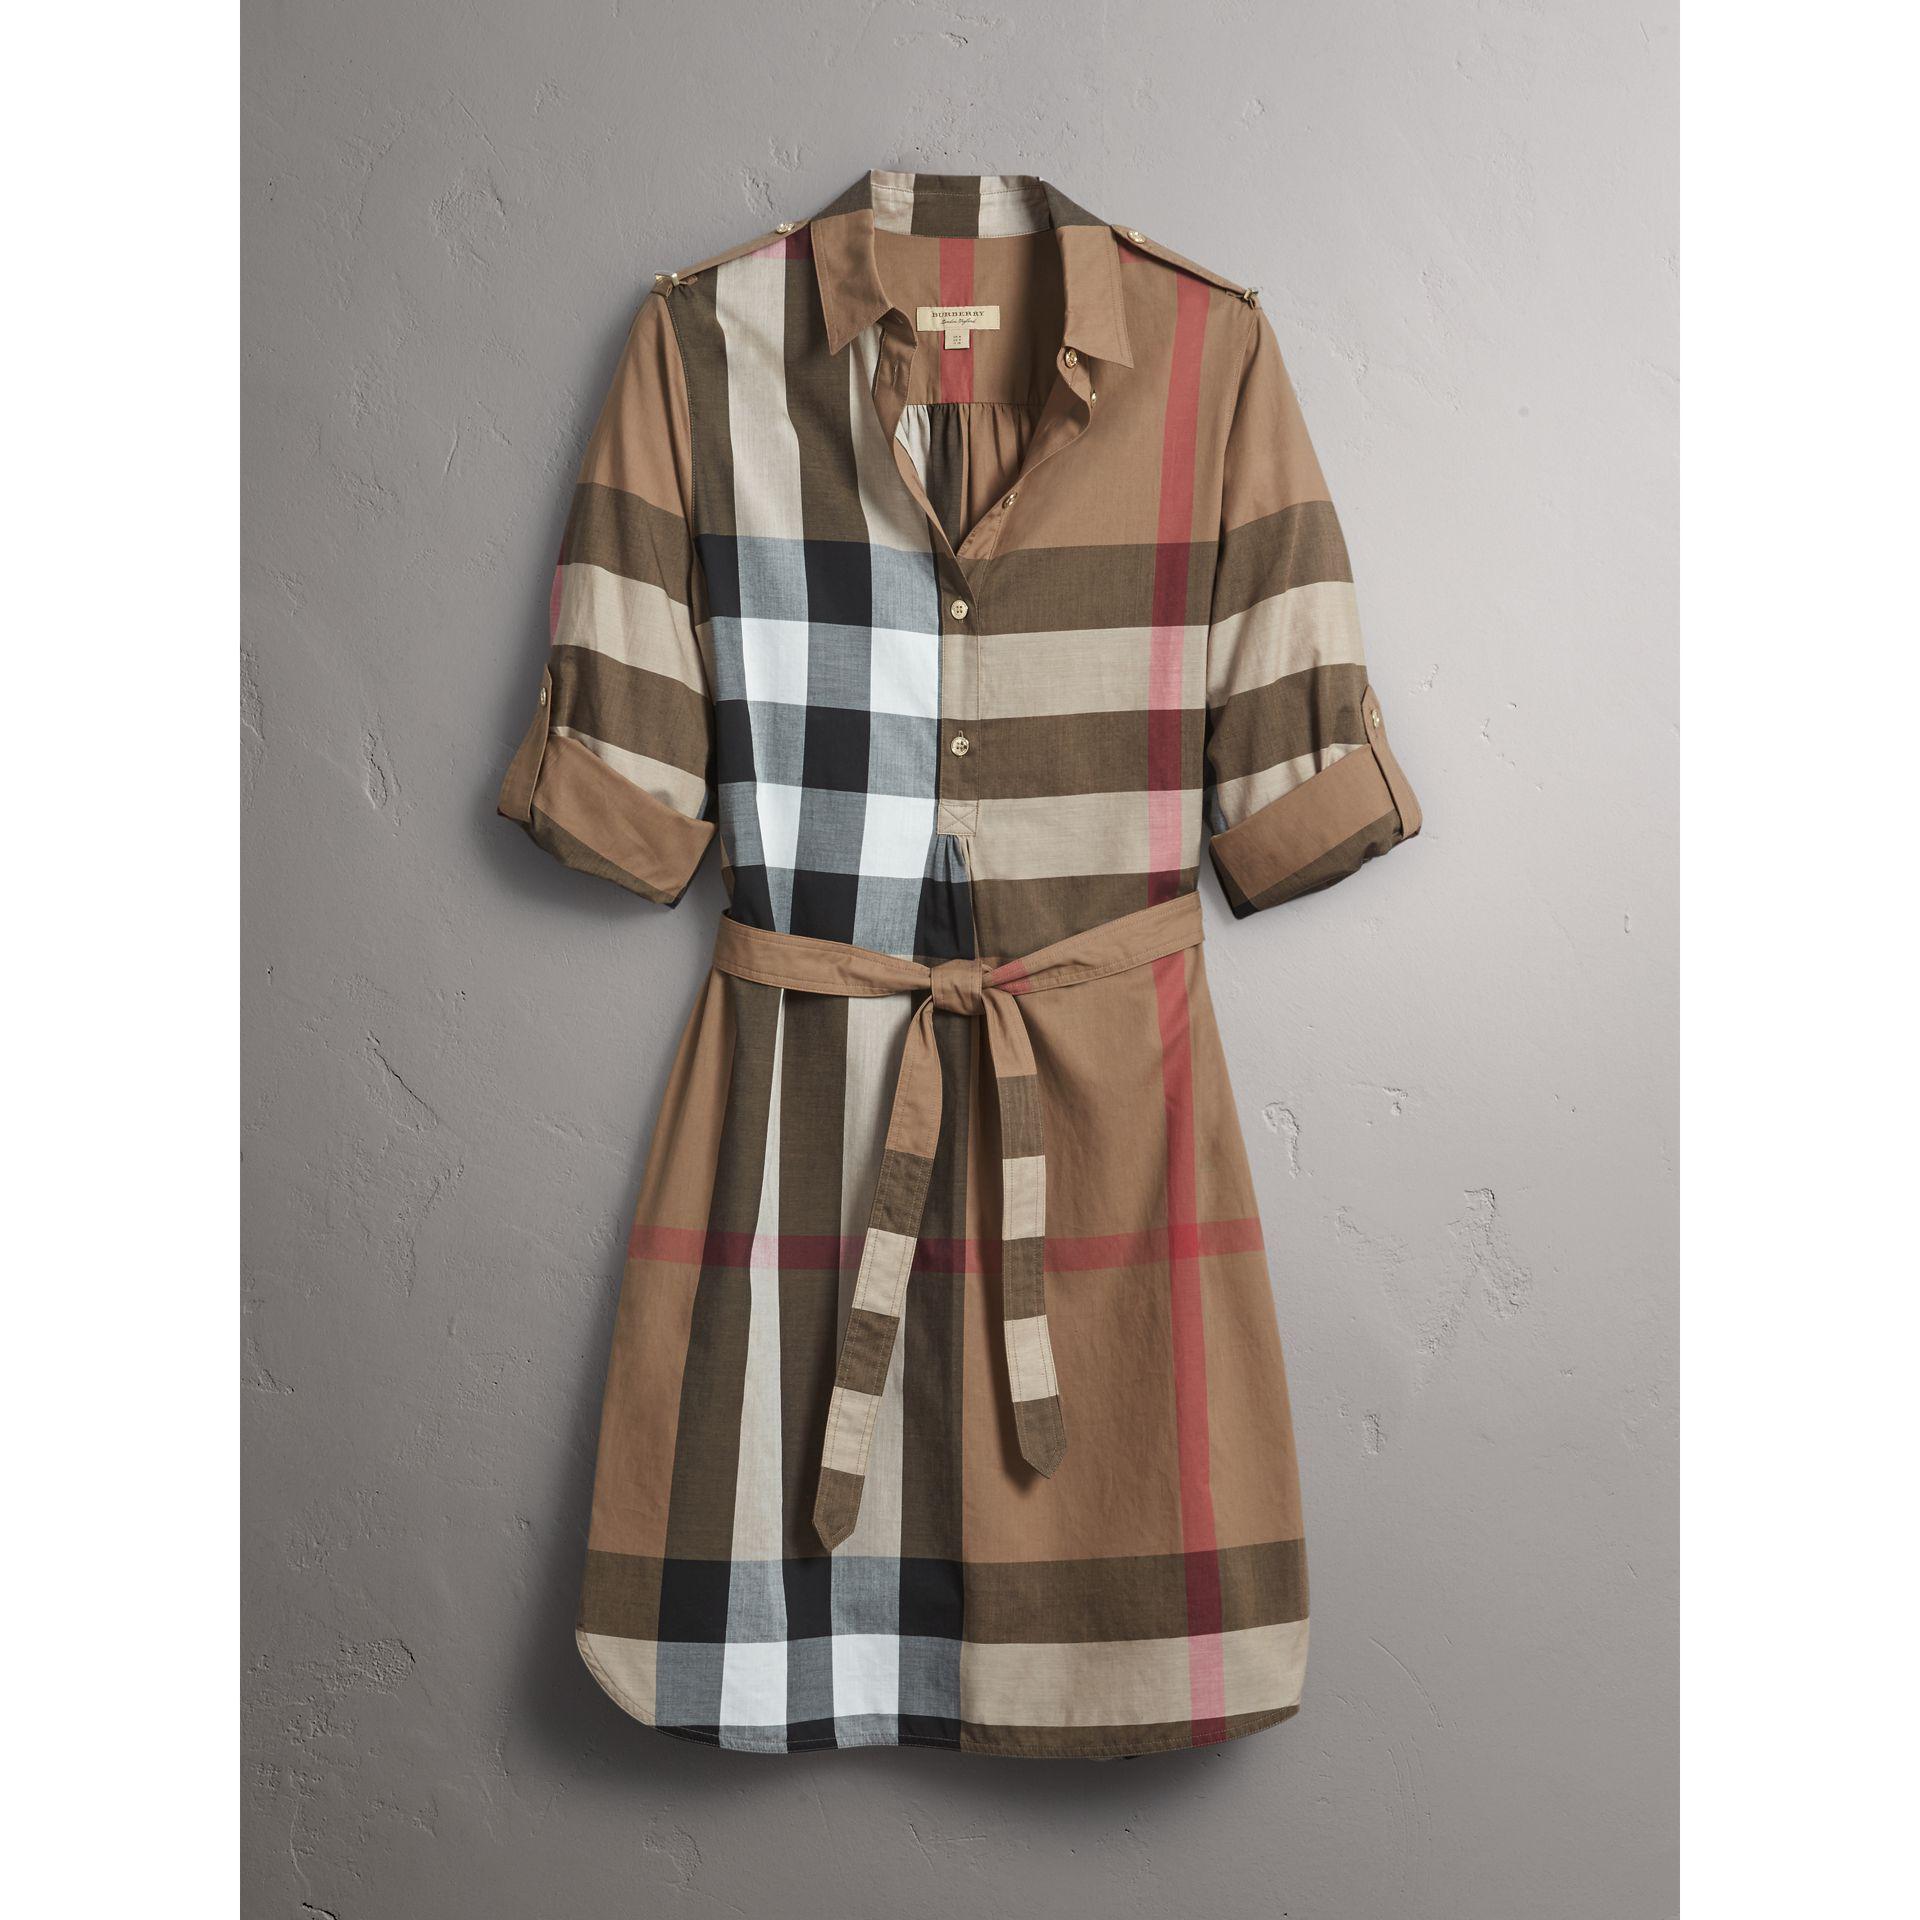 Lyst - Burberry Check Cotton Shirt Dress Taupe Brown in Brown